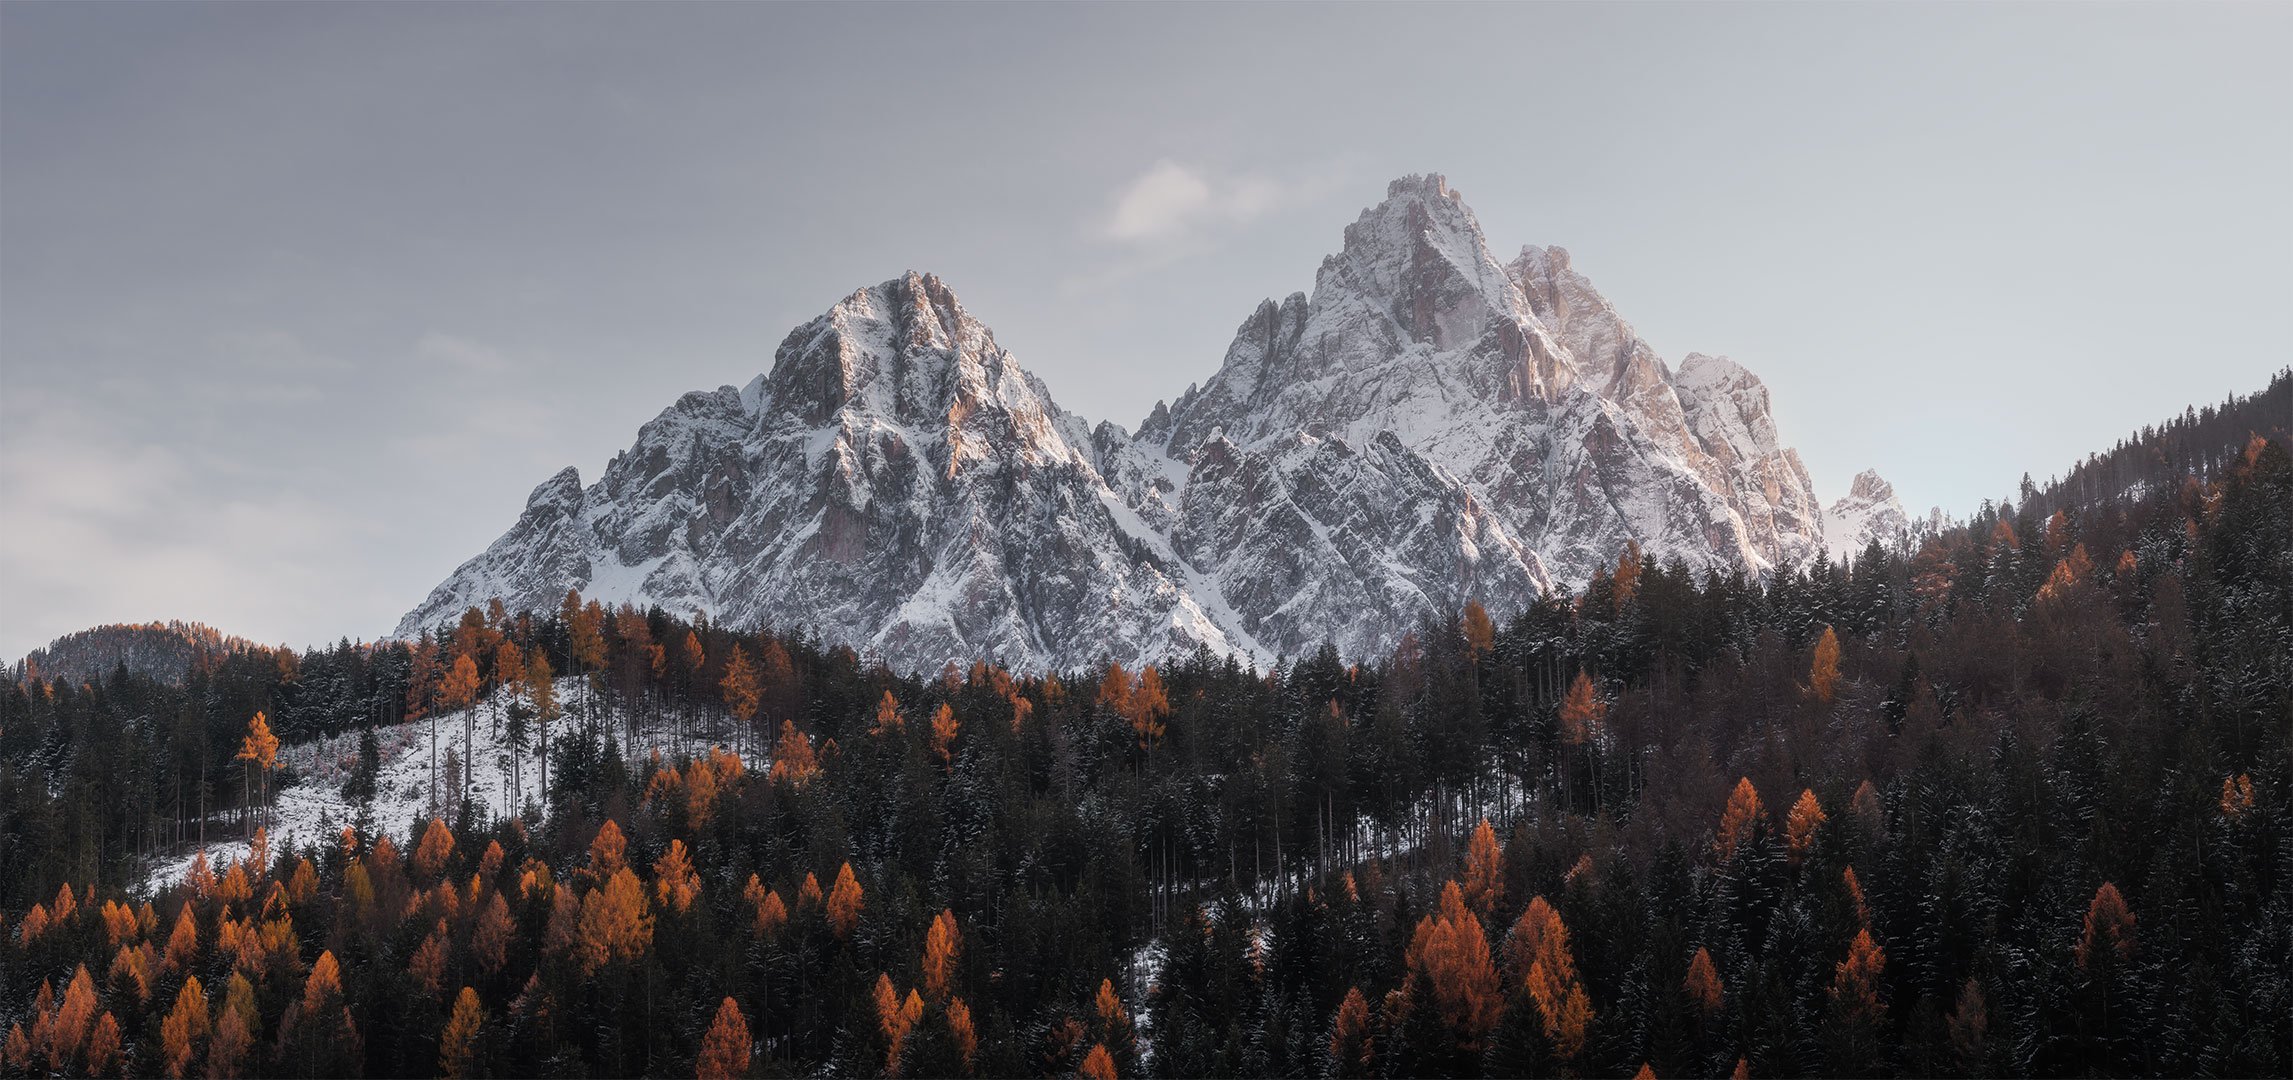 Capture the awe-inspiring beauty of the Dolomites in Italy with this stunning landscape photograph taken by Jennifer Esseiva using her trusty Nikon D810 camera. The image showcases a panoramic view of the majestic mountains, bathed in the warm hues of a breathtaking sunset. Each peak is silhouetted against the vibrant sky, creating a scene of unparalleled natural splendor. This captivating landscape photograph exemplifies the beauty of the Dolomites and highlights Jennifer Esseiva's talent for capturing the essence of this iconic location through her lens.